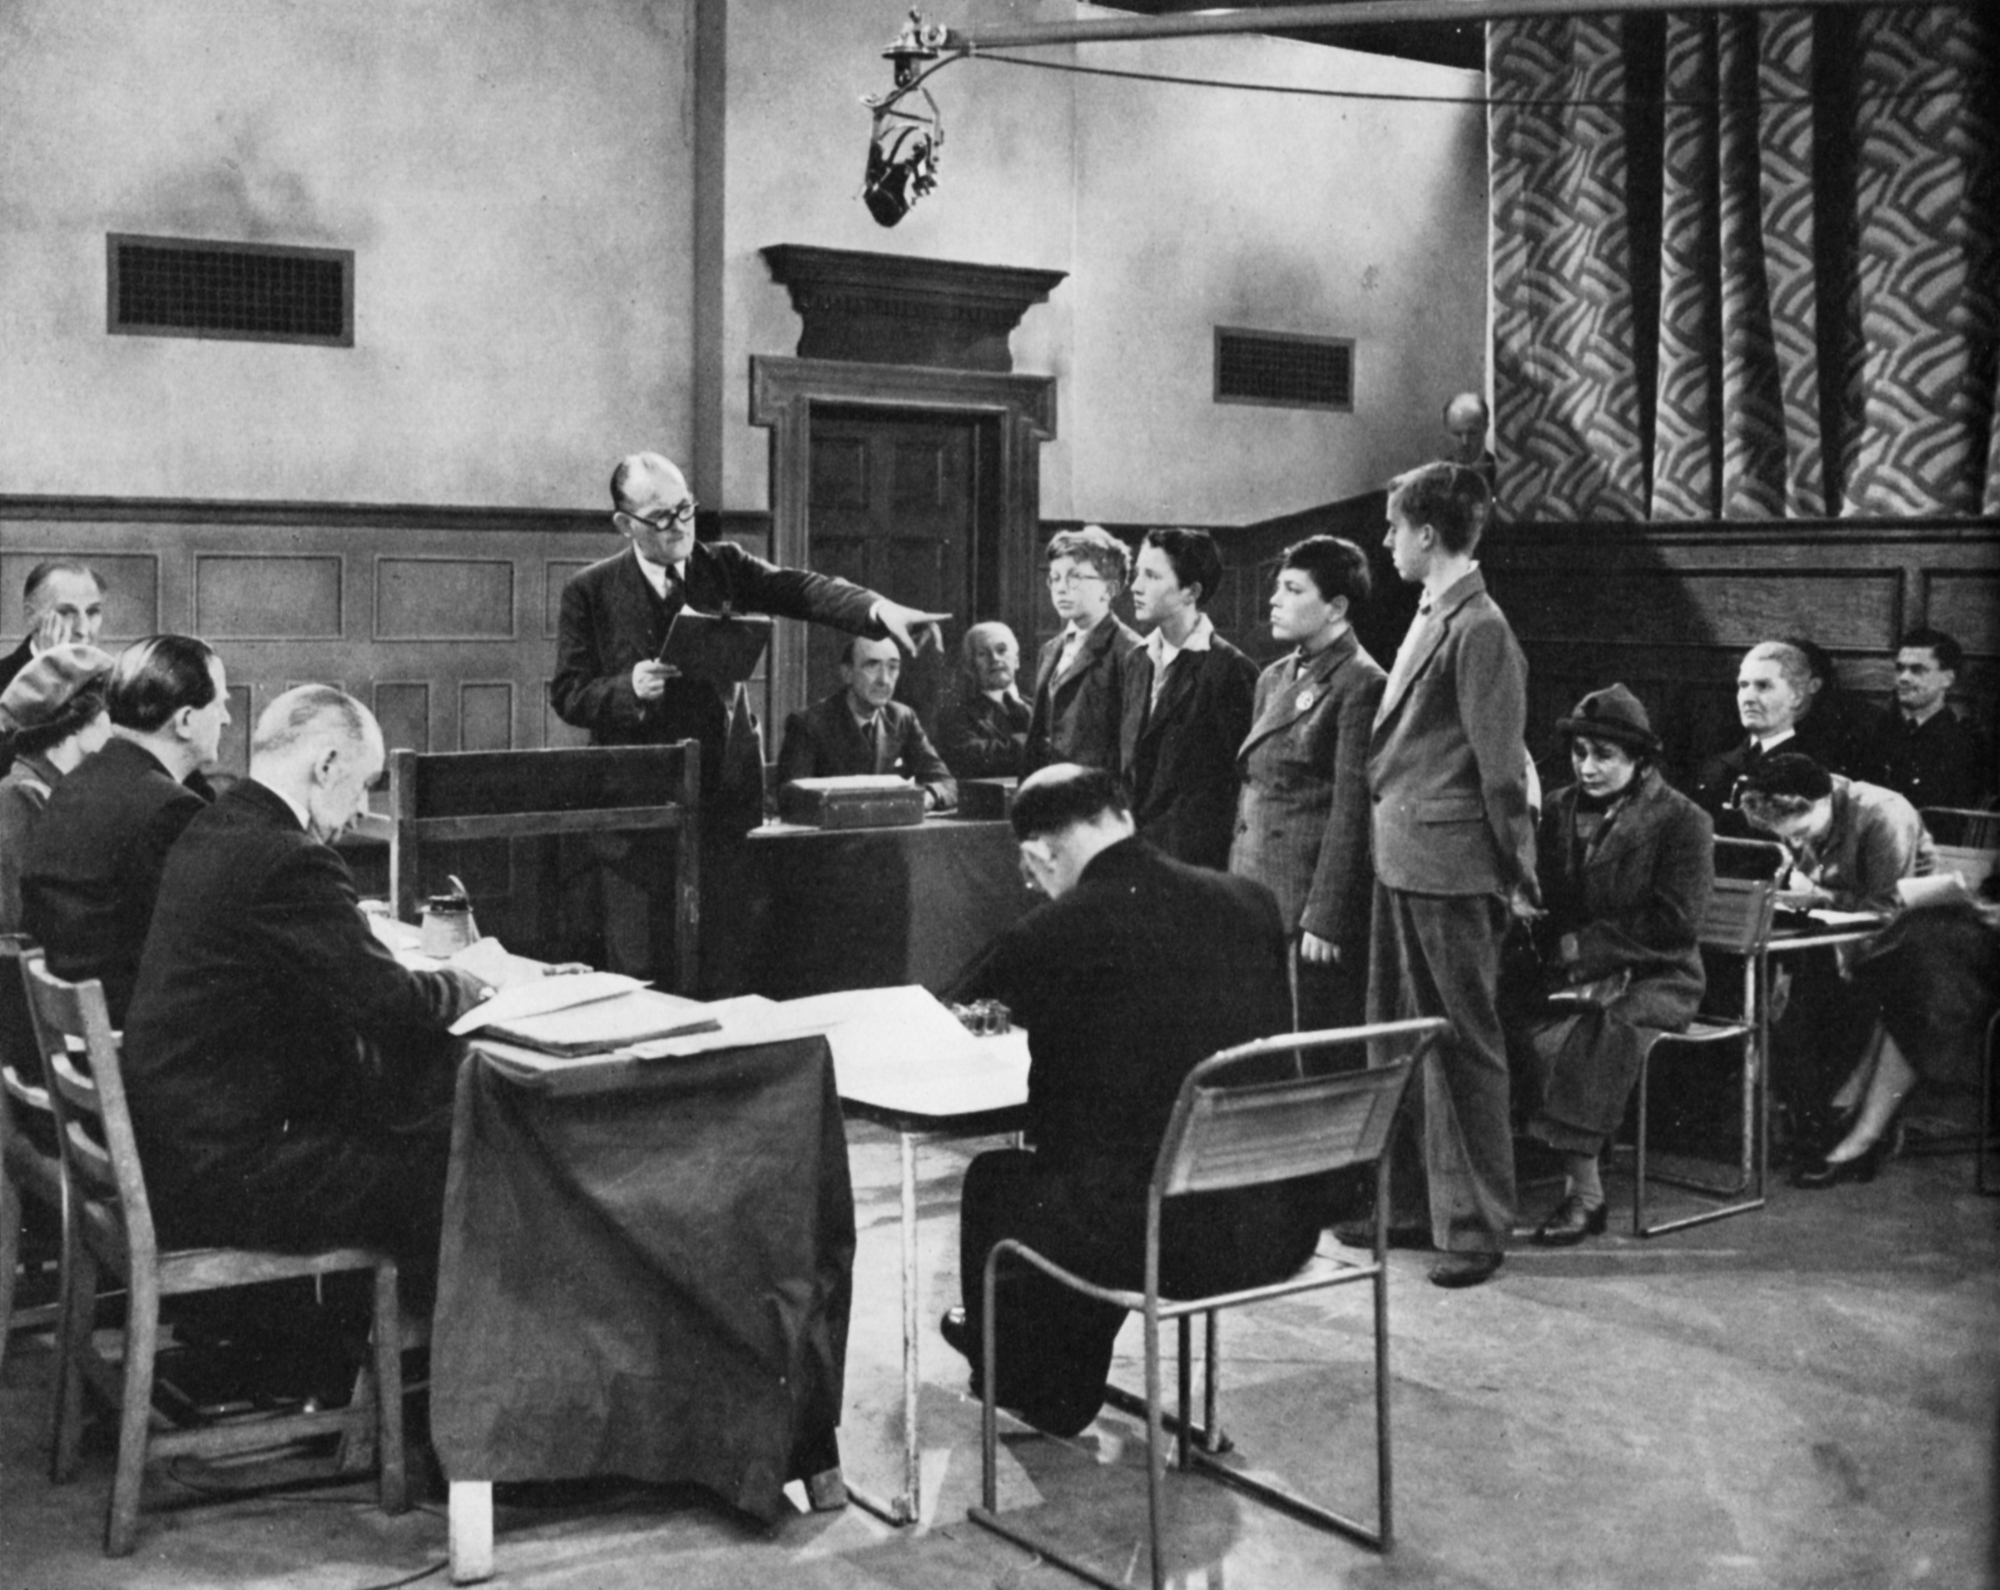 Four boys stand in front of a panel of magistrates